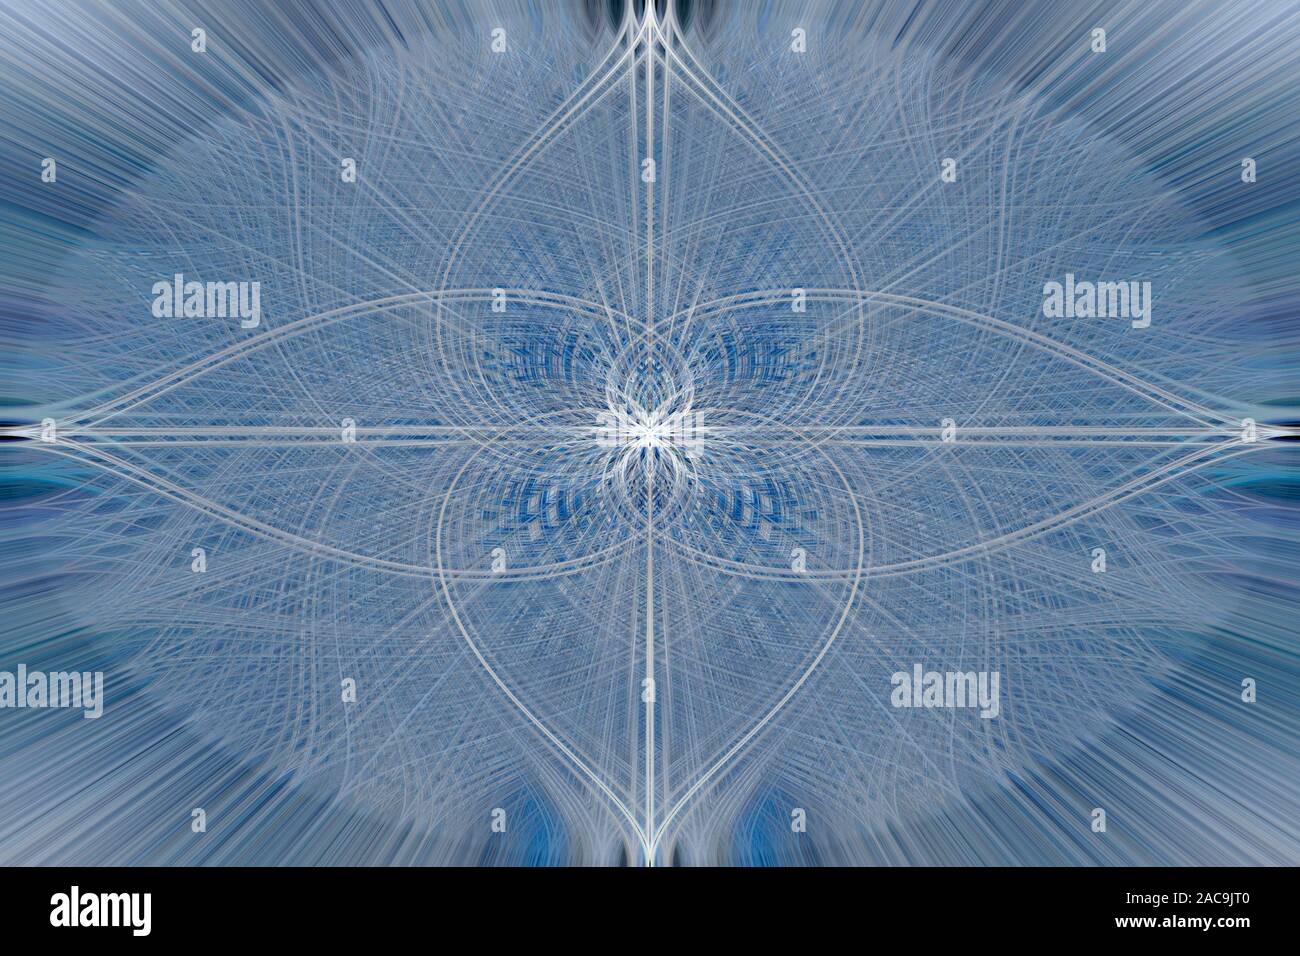 abstract background, symmetrical lines and squiggles, consisting of thousands of white and blue lines Stock Photo